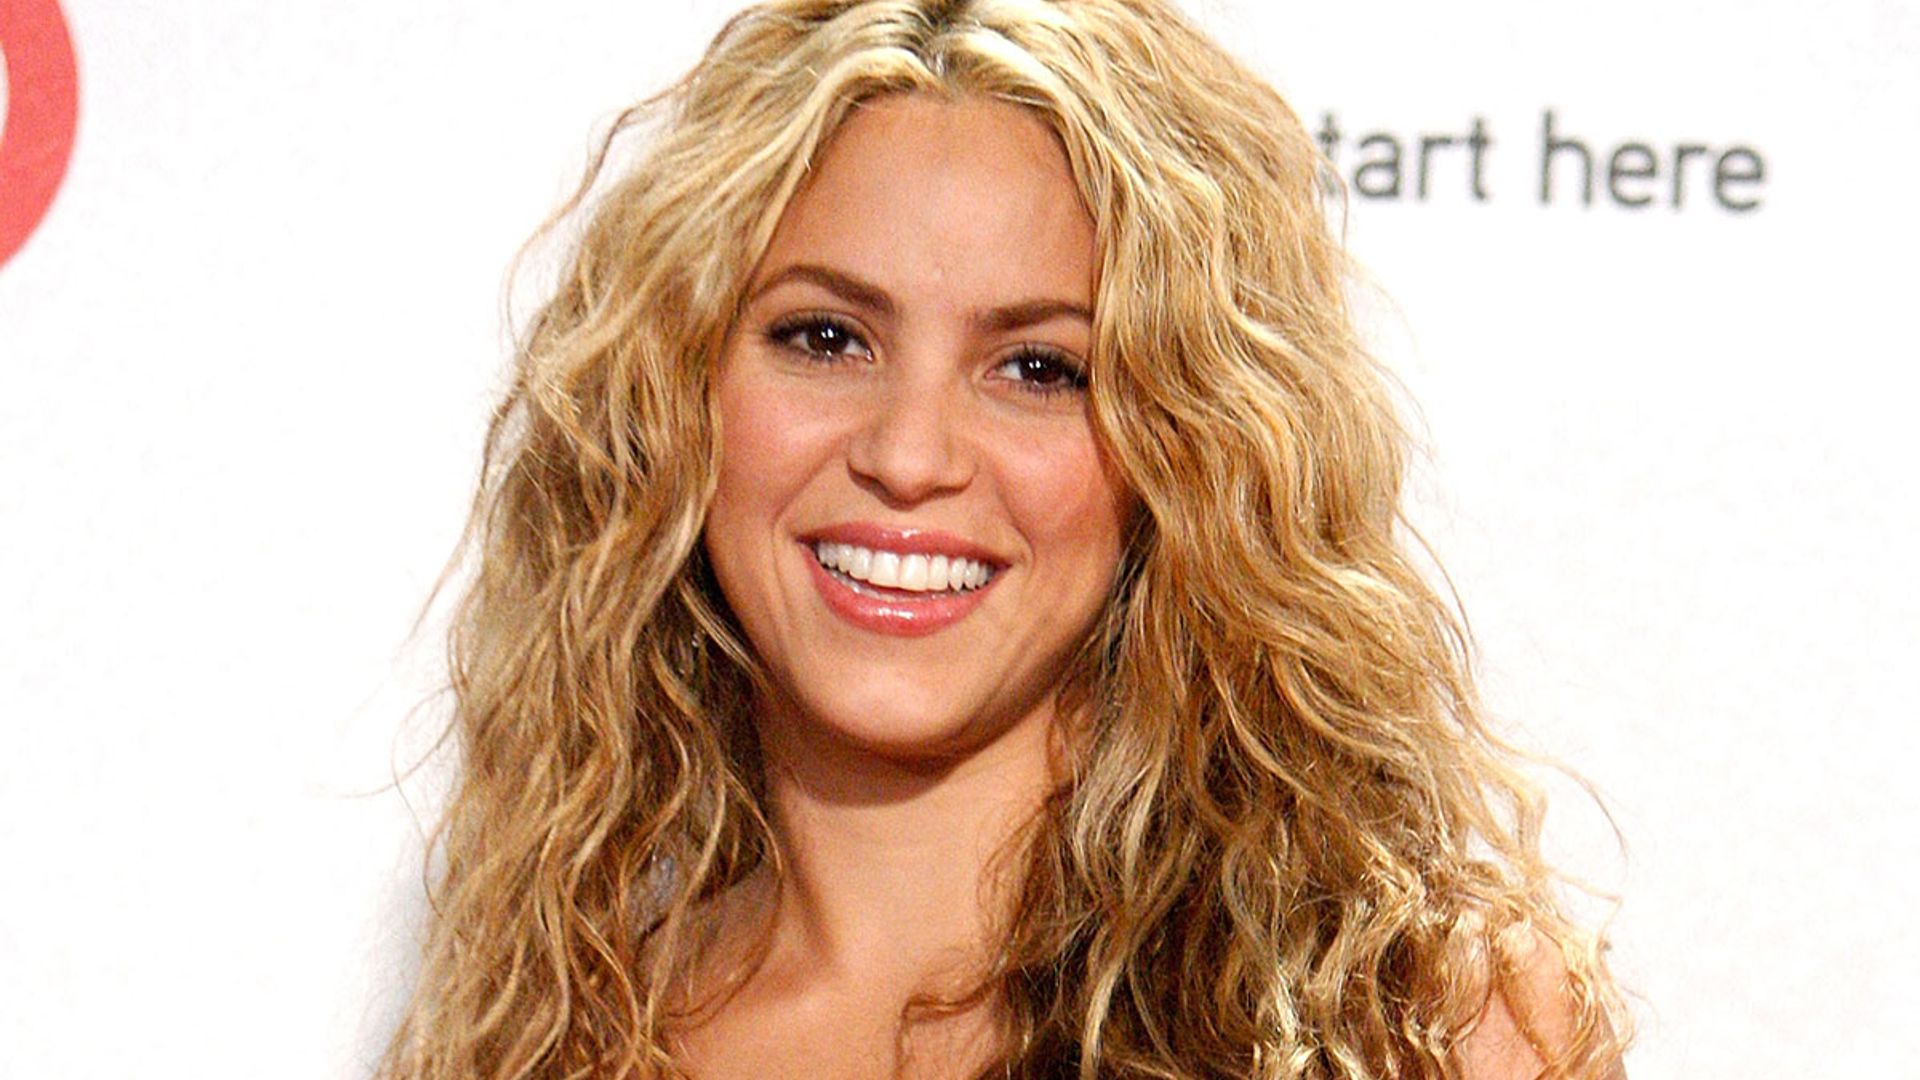 Shakira turns up the heat in cut-out mini dress in gorgeous new photo